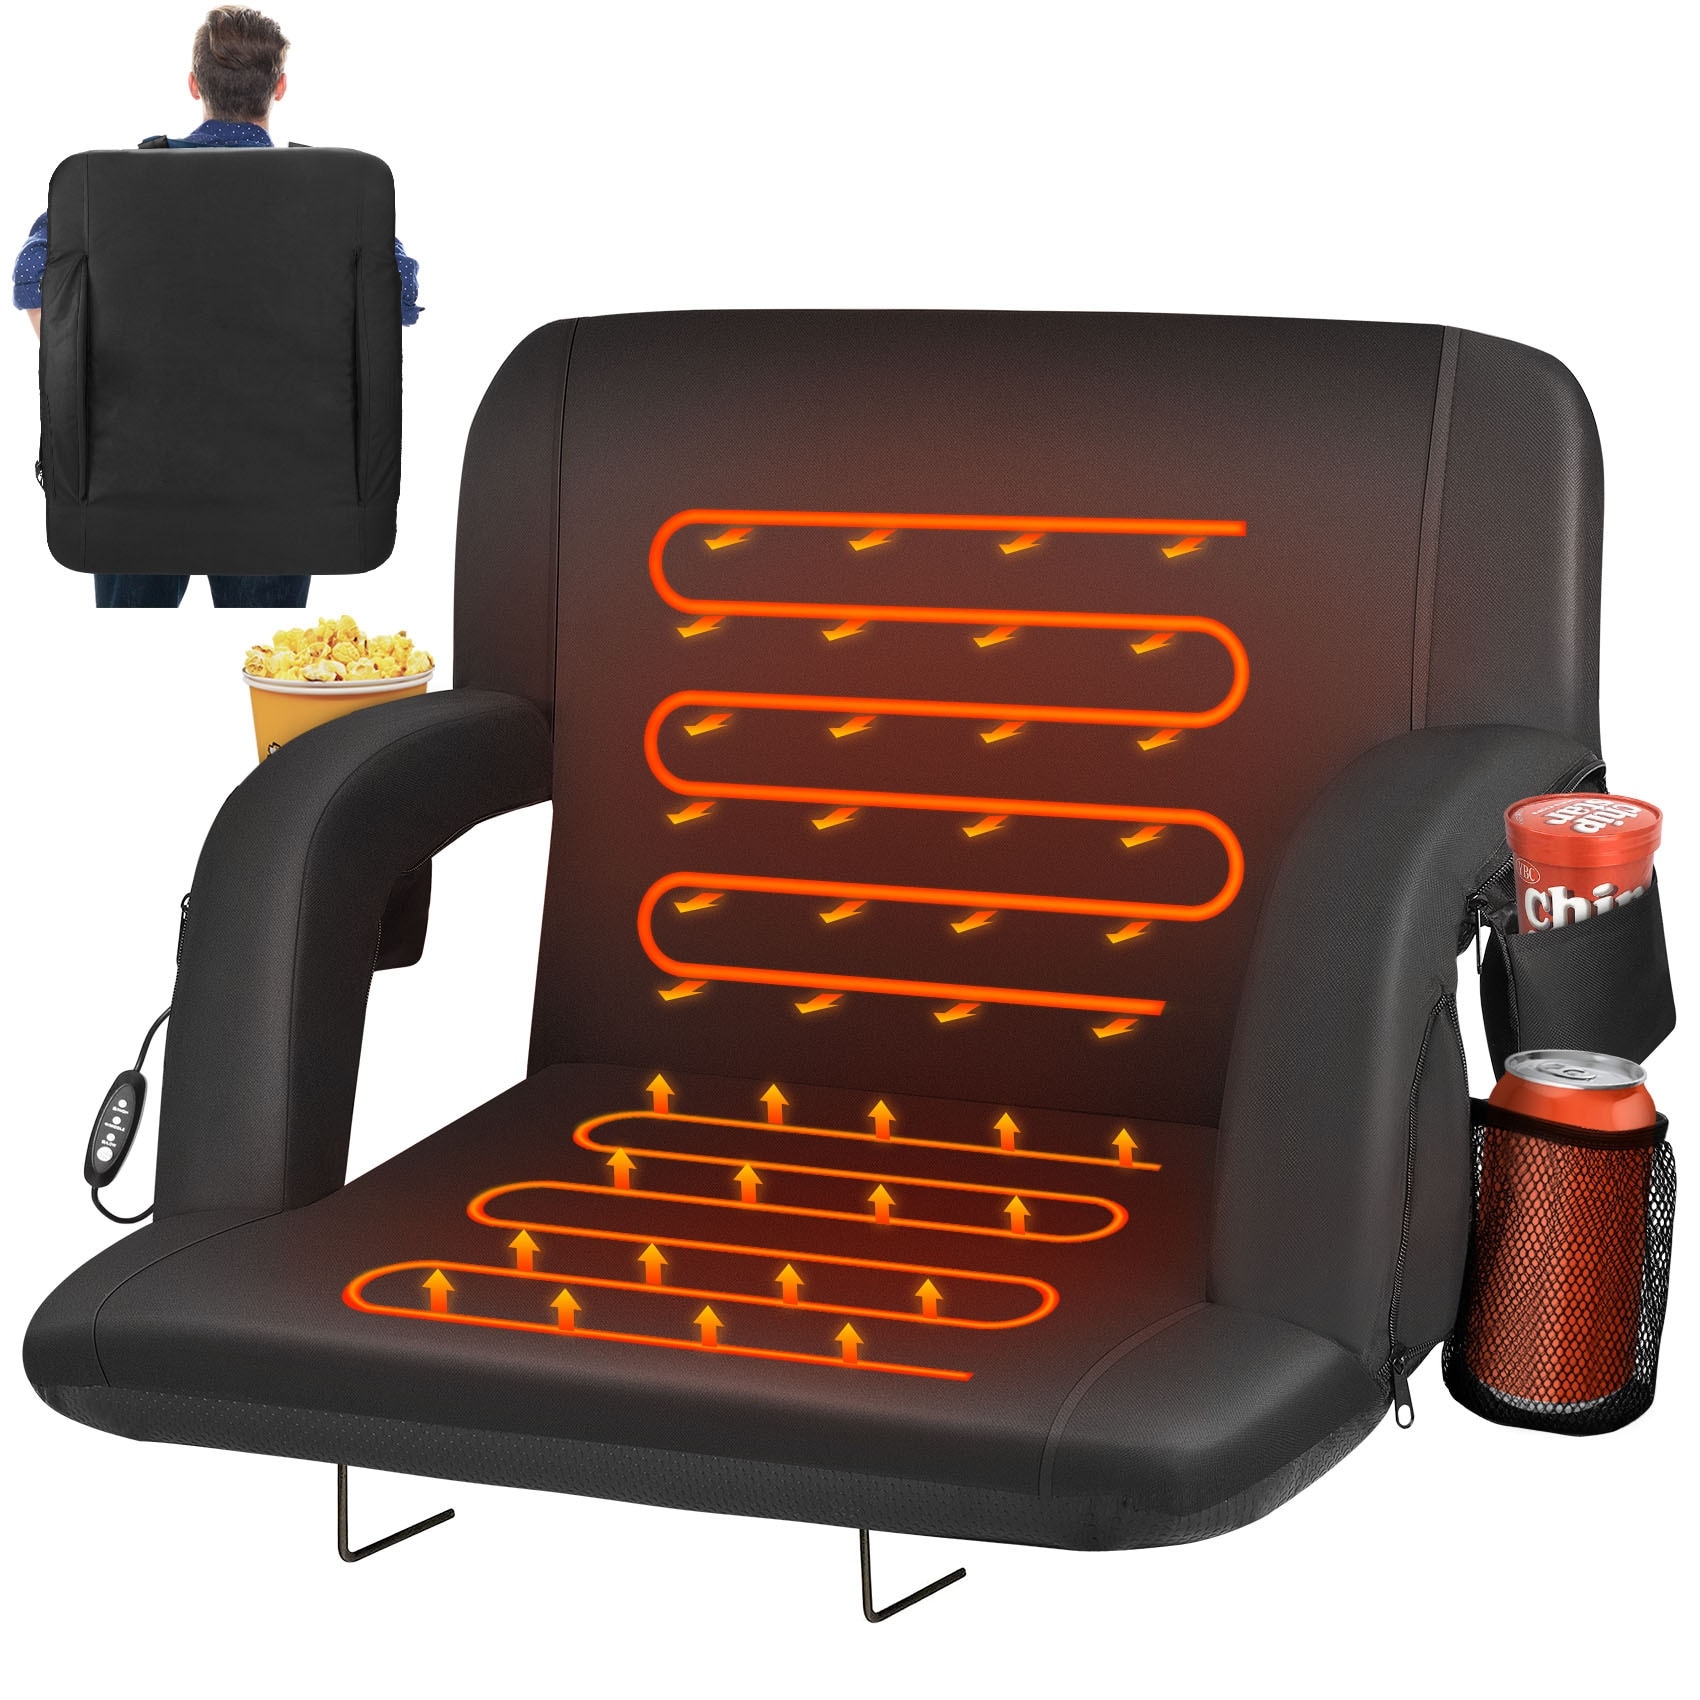 https://ak1.ostkcdn.com/images/products/is/images/direct/801d6fb629841b1a1c3d7ae8f315b2941ca07dd2/25-Inch-Heated-Stadium-Seats-for-Bleachers-Portable-Bleacher-Seat-Foldable-Stadium-Chair.jpg